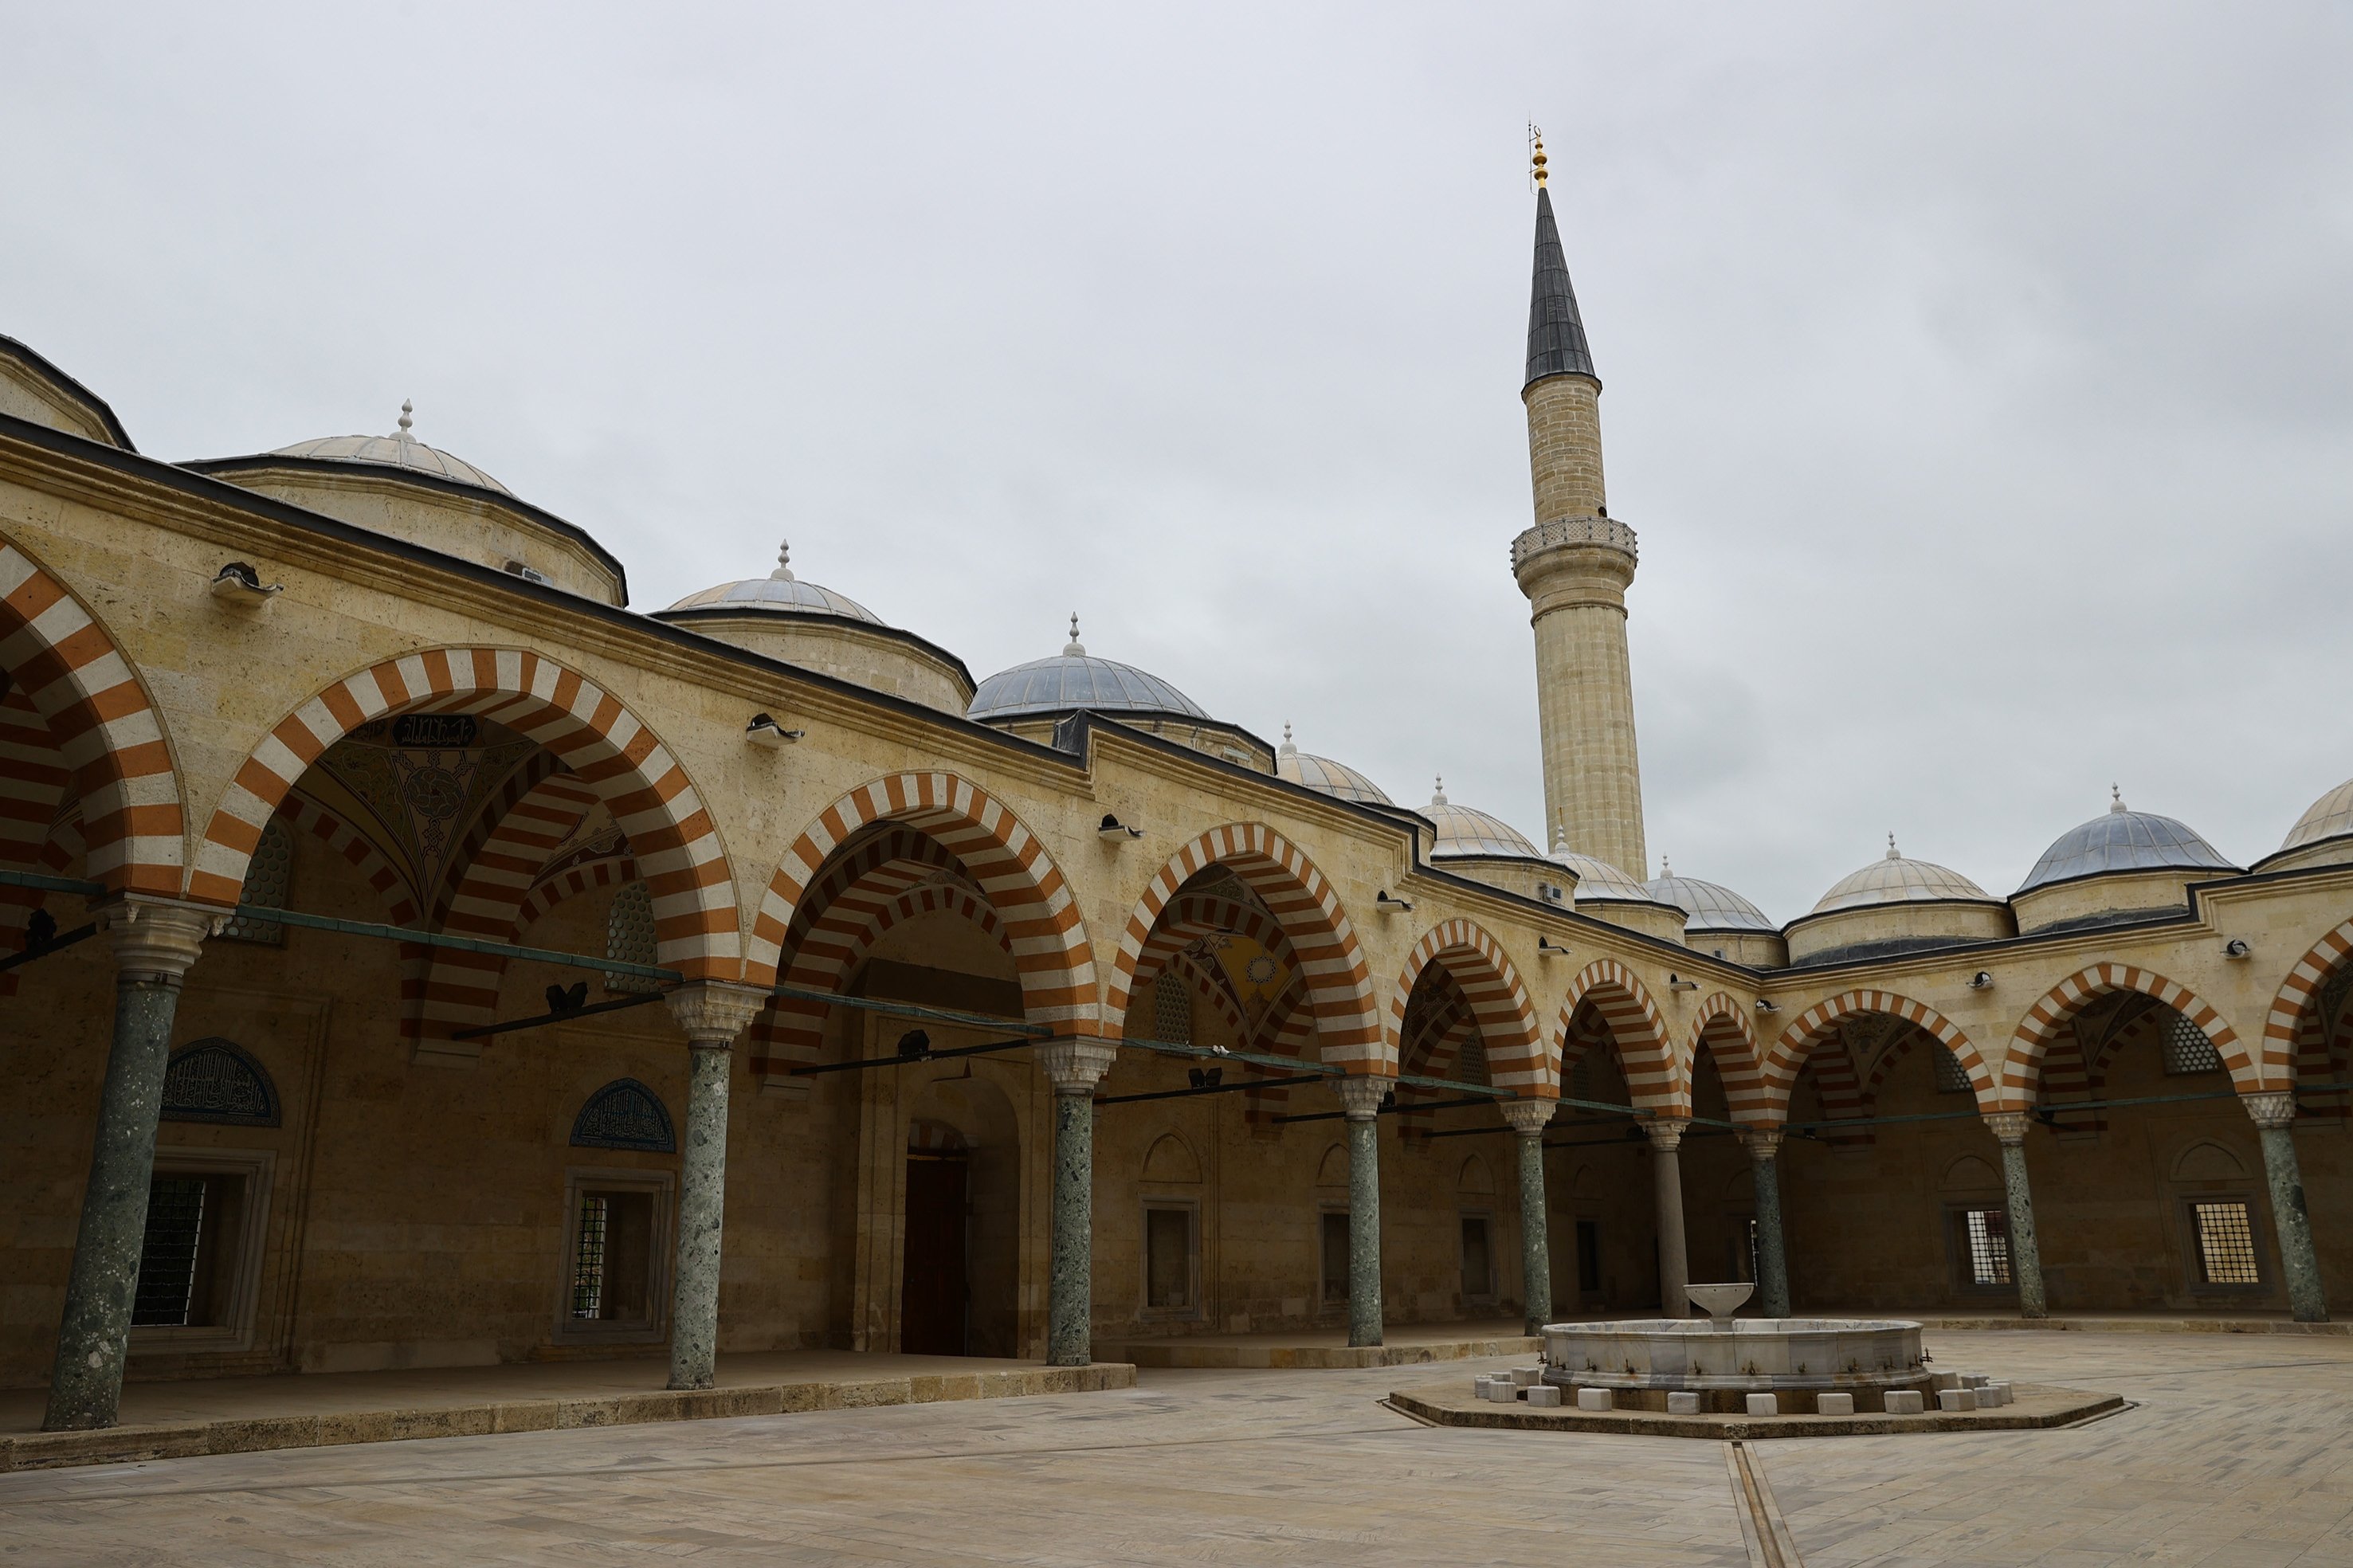 One of the minarets of the Üç Şerefeli Mosque (the Mosque with Three Balconies) can be seen above the mosque